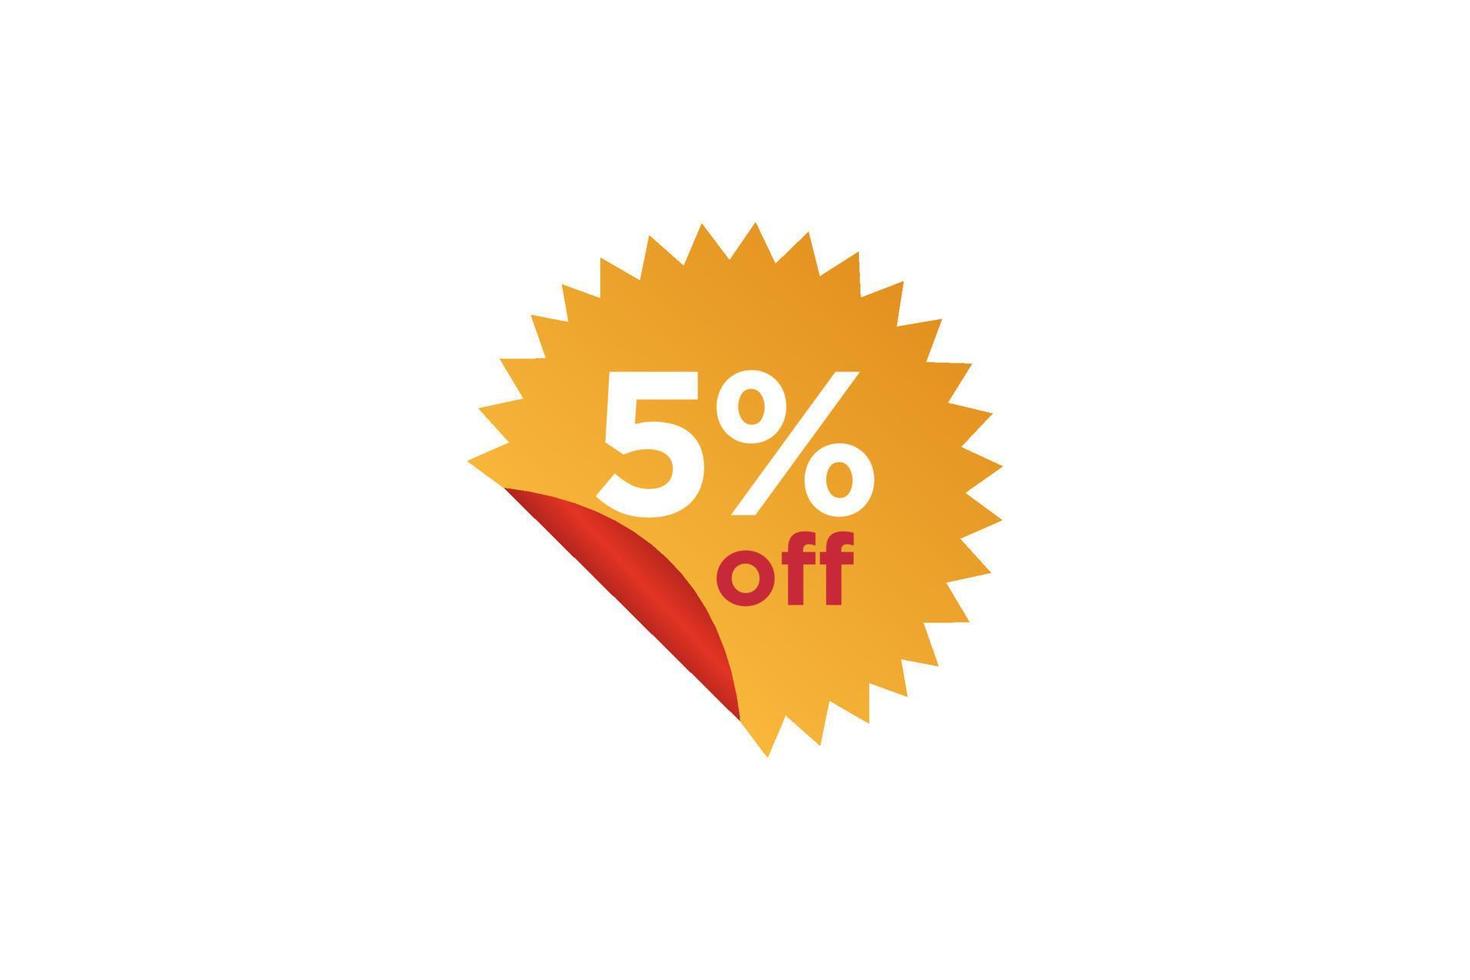 5 discount, Sales Vector badges for Labels, , Stickers, Banners, Tags, Web Stickers, New offer. Discount origami sign banner.